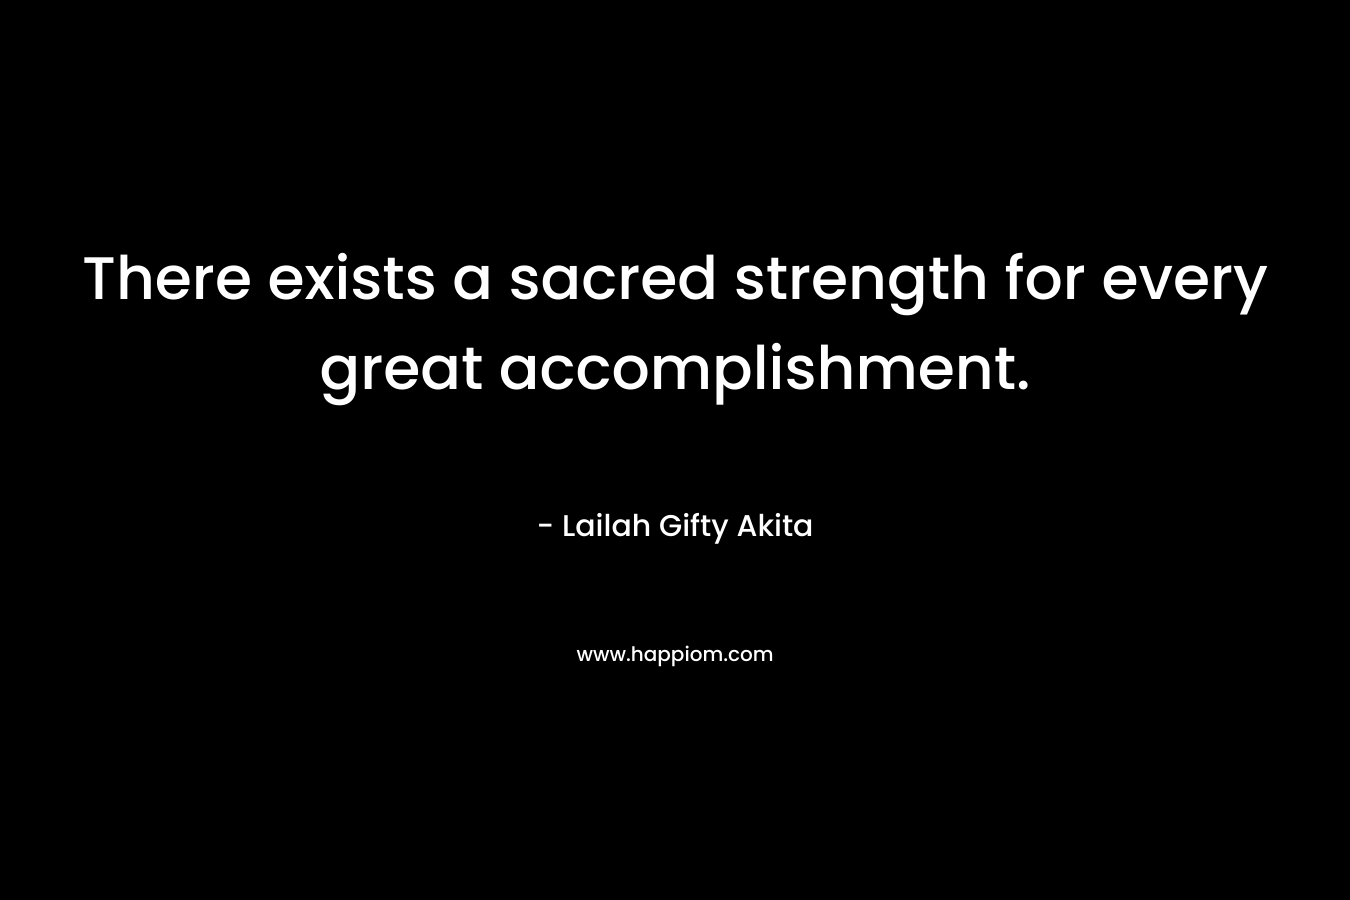 There exists a sacred strength for every great accomplishment.